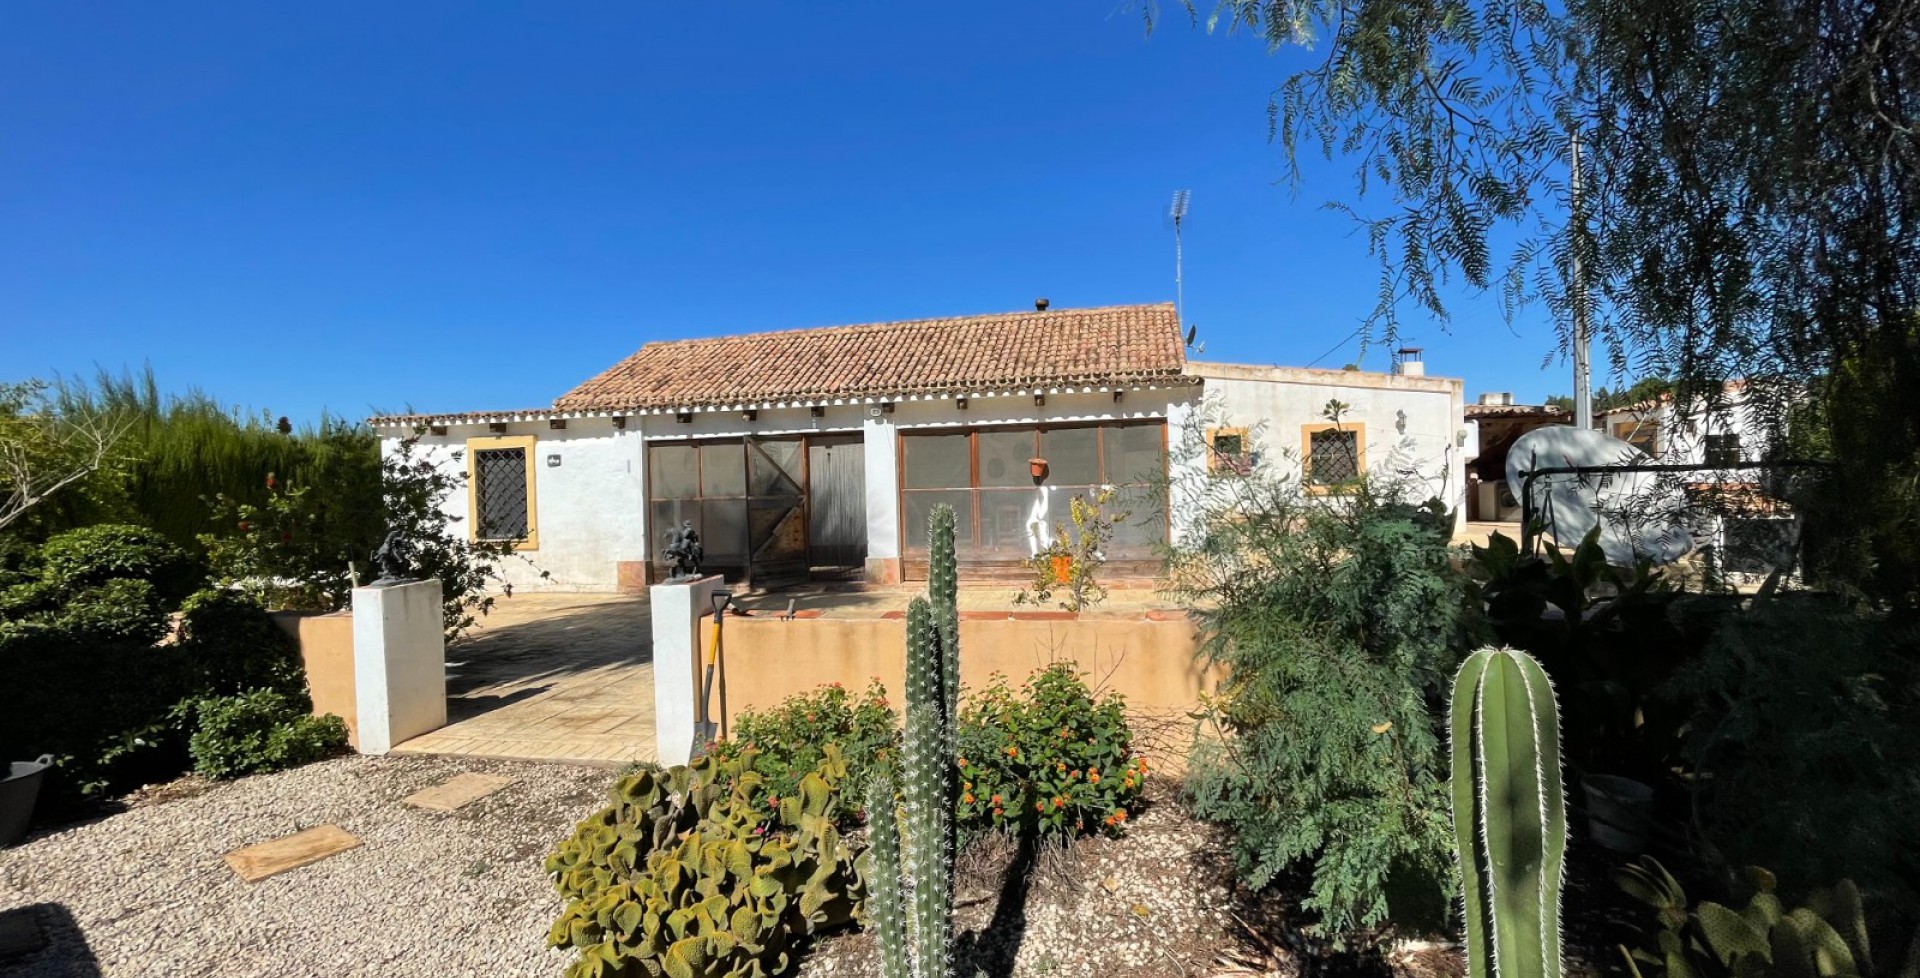 Detached Character Country House with Swimming Pool, Cieza, Murcia, Spain